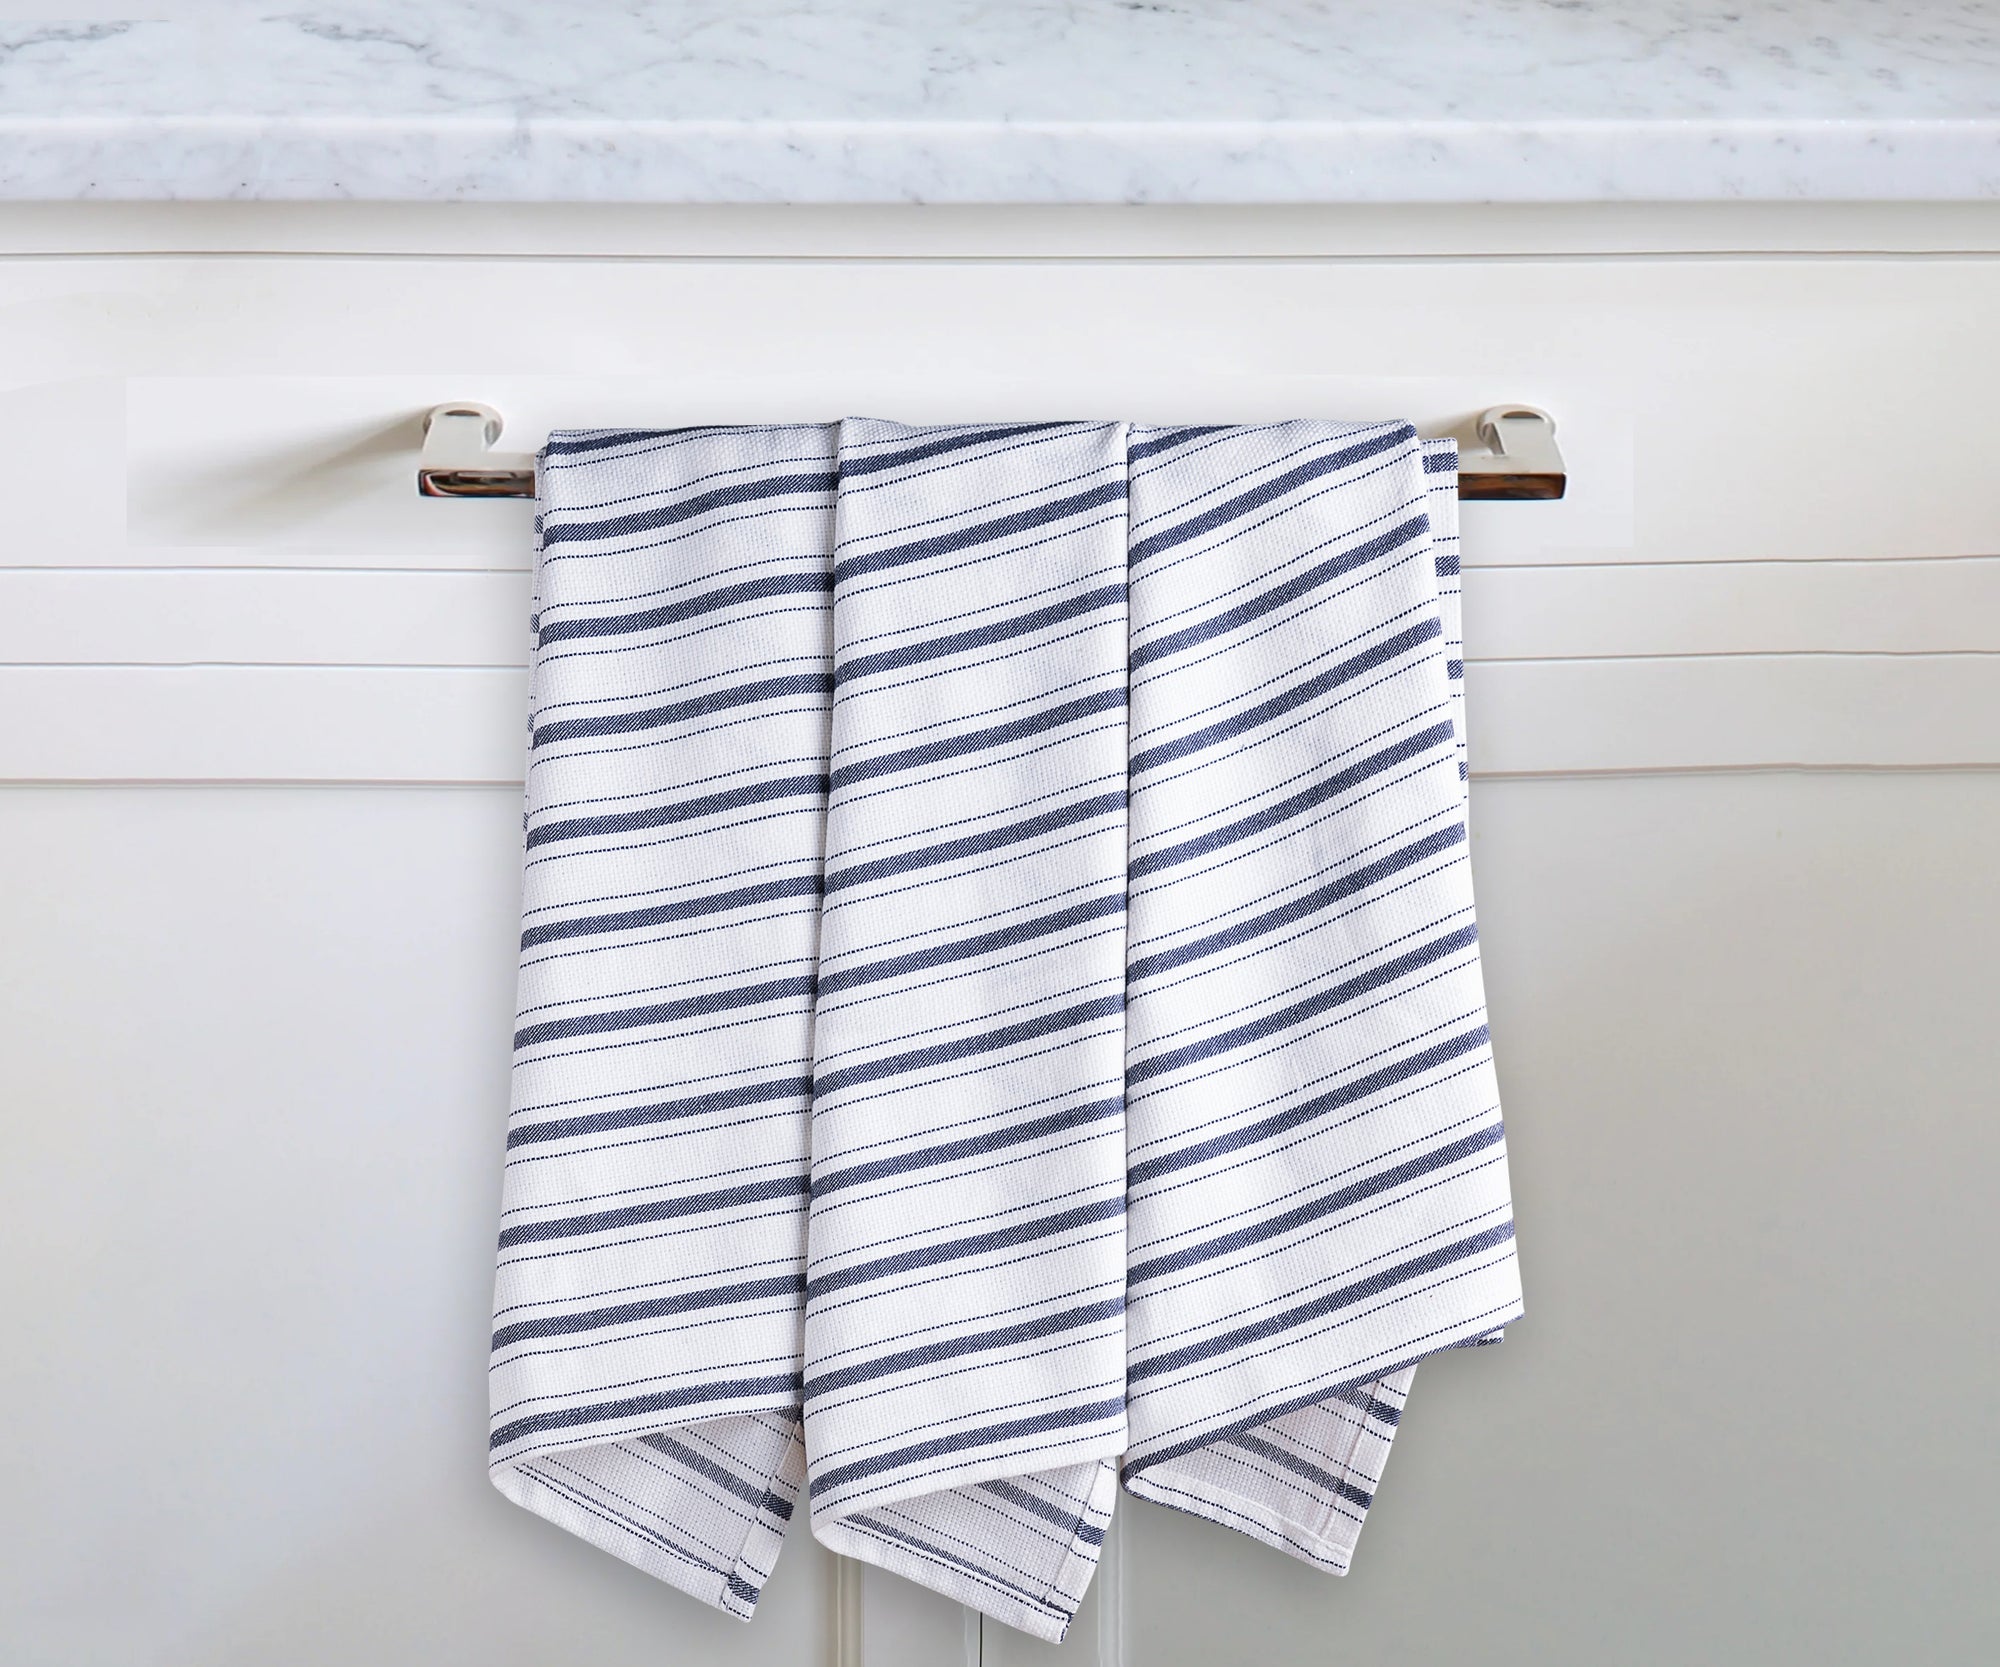 Can You Wash Dish Towels with Regular Laundry?